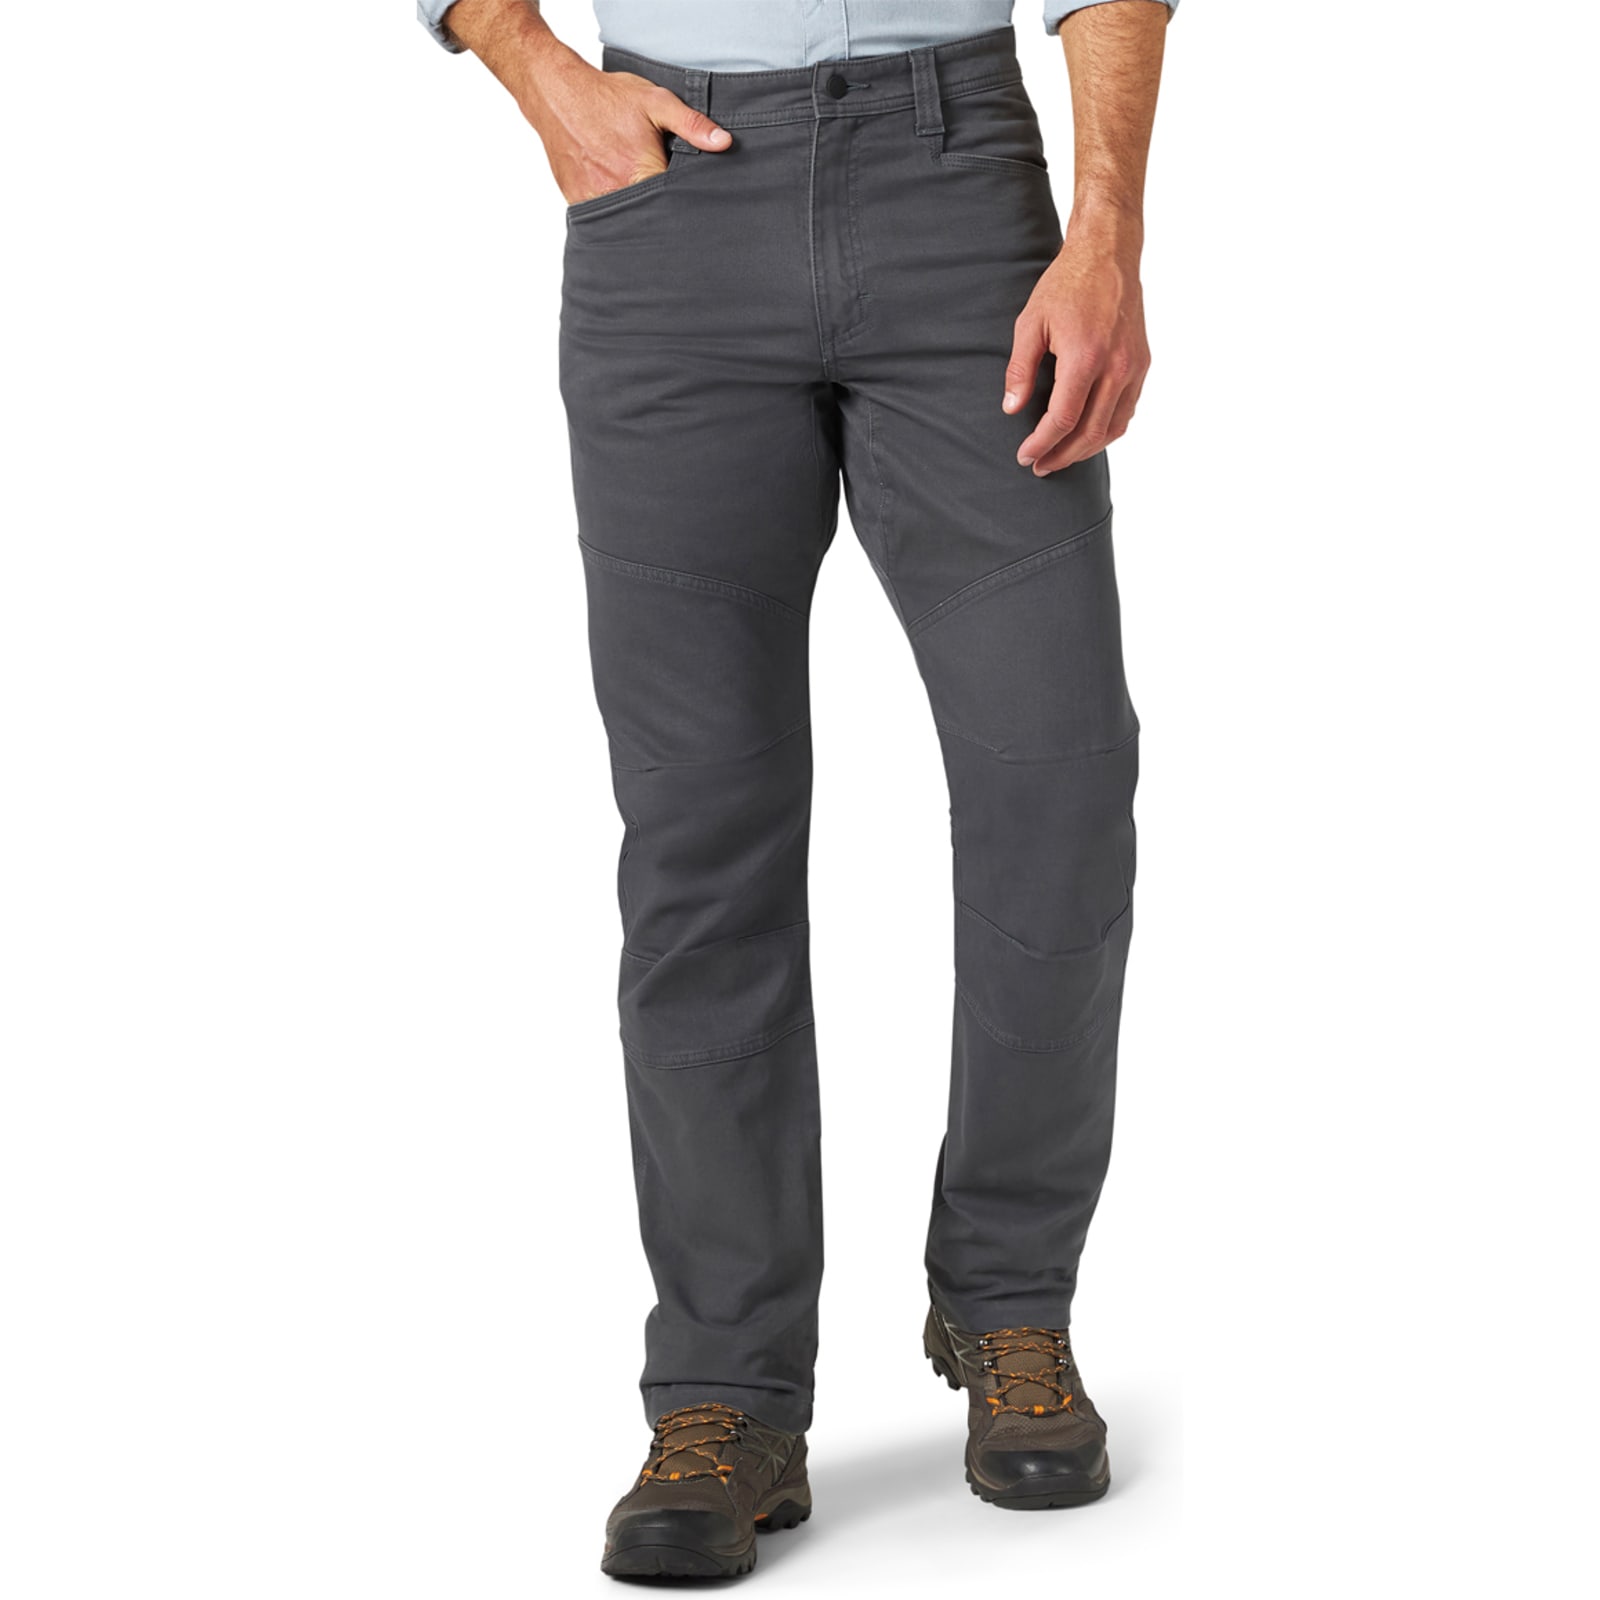 Men's Grey Straight Fit Mid-Rise Reinforced Utility Pants by ATG Wrangler  at Fleet Farm